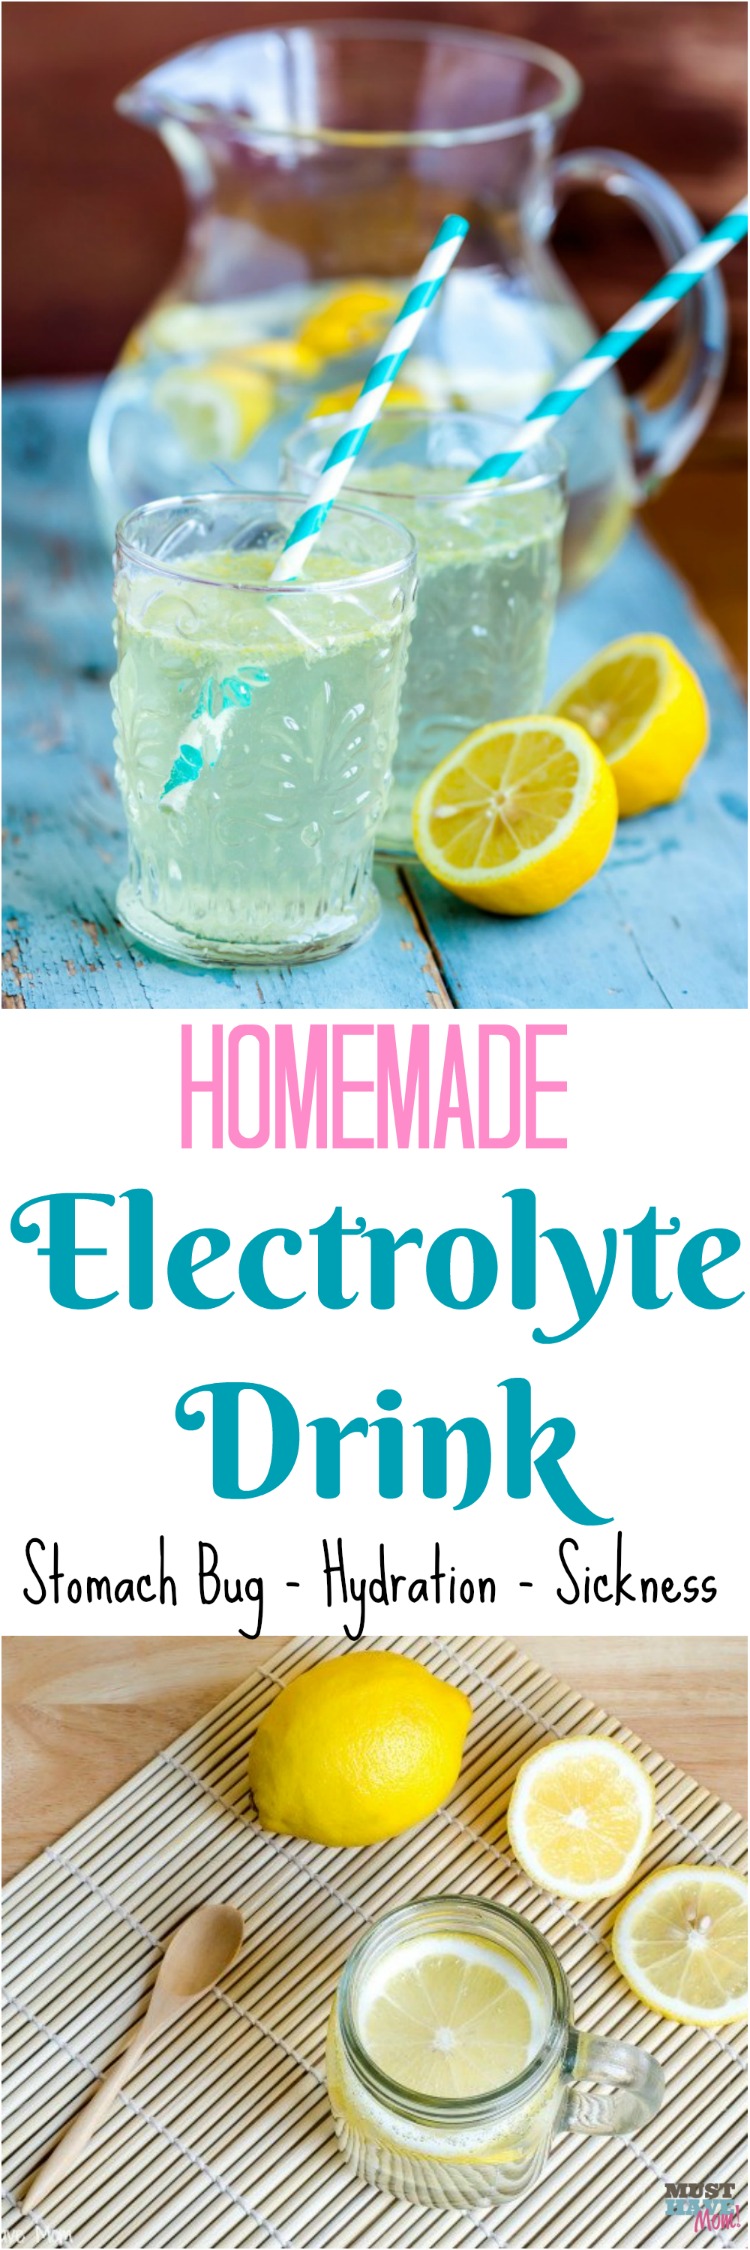 Homemade Electrolyte Drink recipe for sickness, hydration, stomach bug, food poisoning. This natural remedy works and is So easy to make.